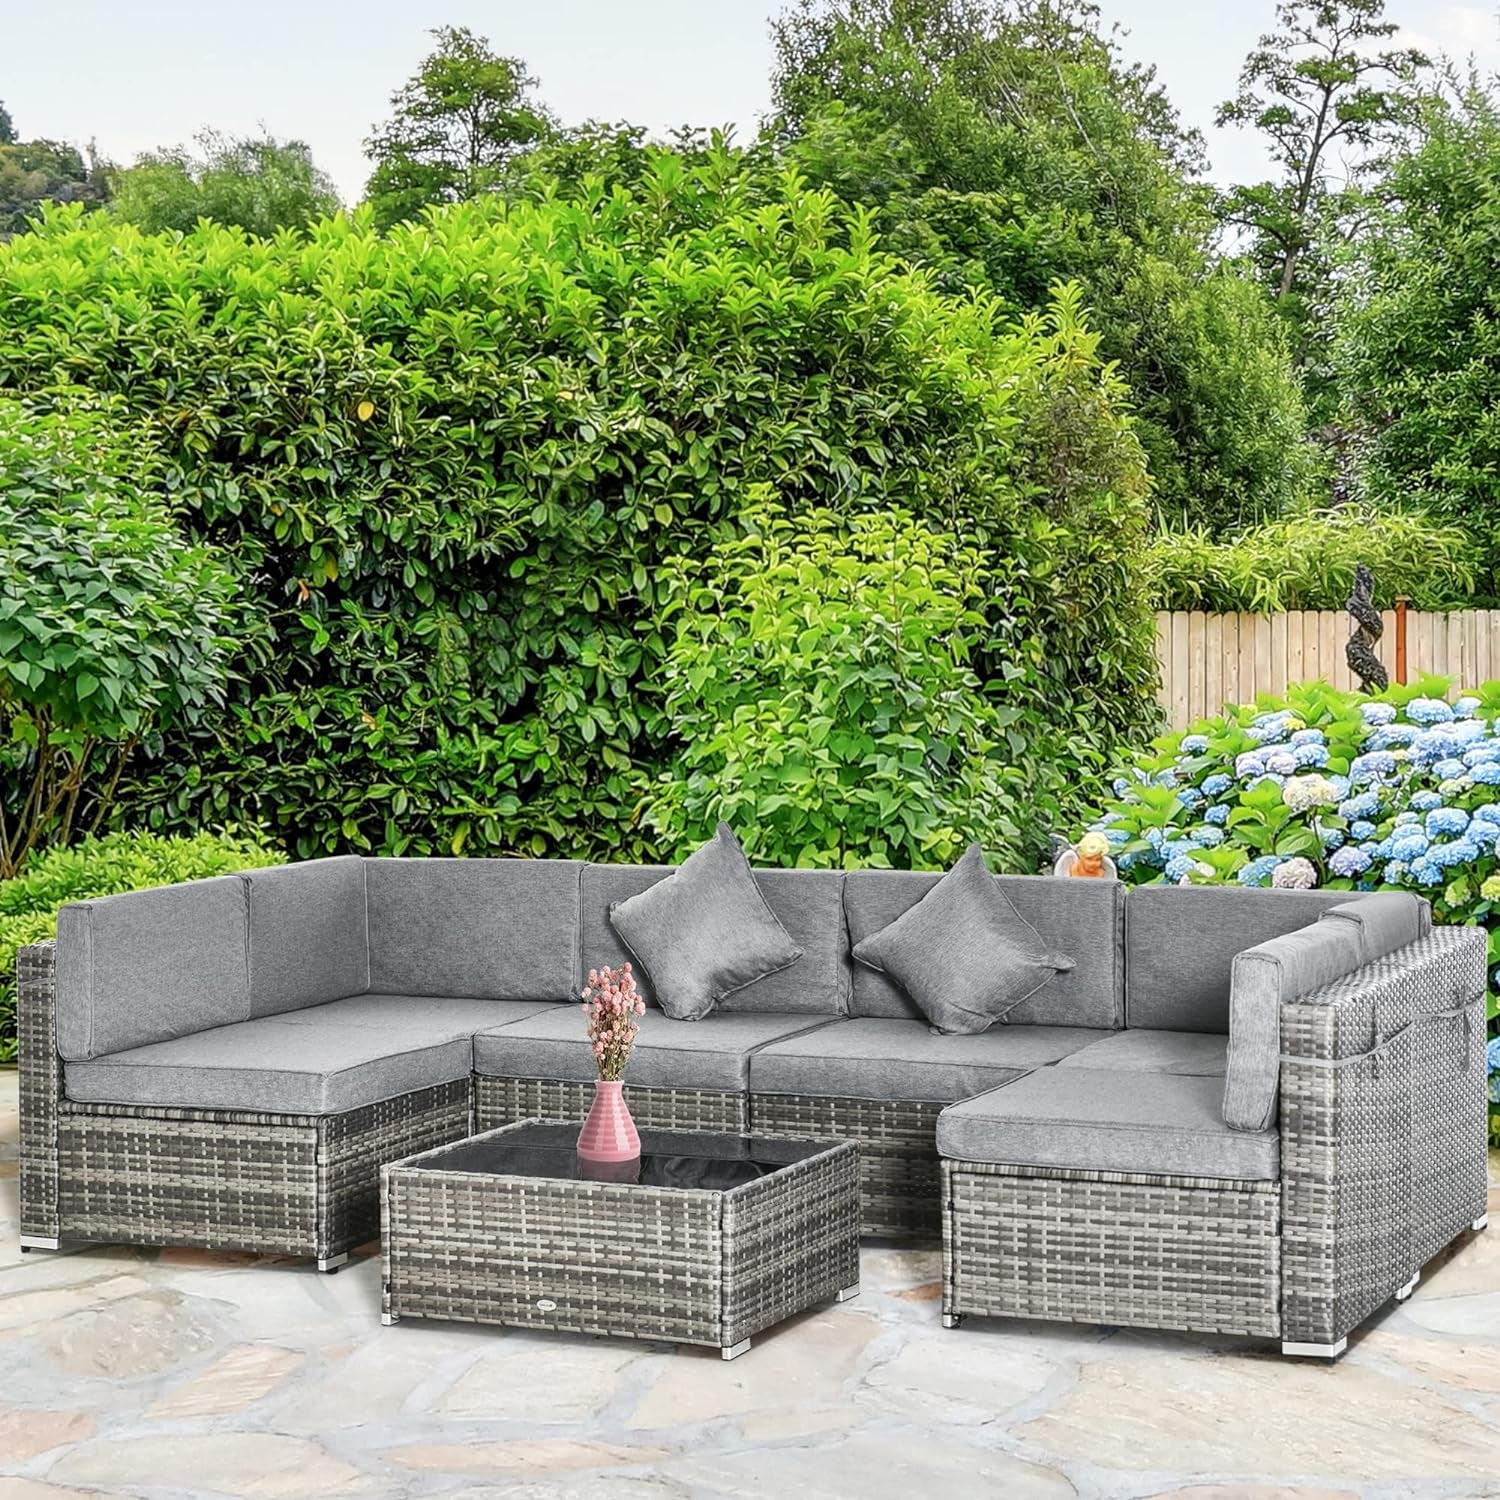 7 Piece Patio Furniture Set, PE Rattan Outdoor Conversation Set with Sectional Sofa, Glass Tabletop, Cushions and Pillows for Garden, Lawn, Deck, Mixed Grey and Grey